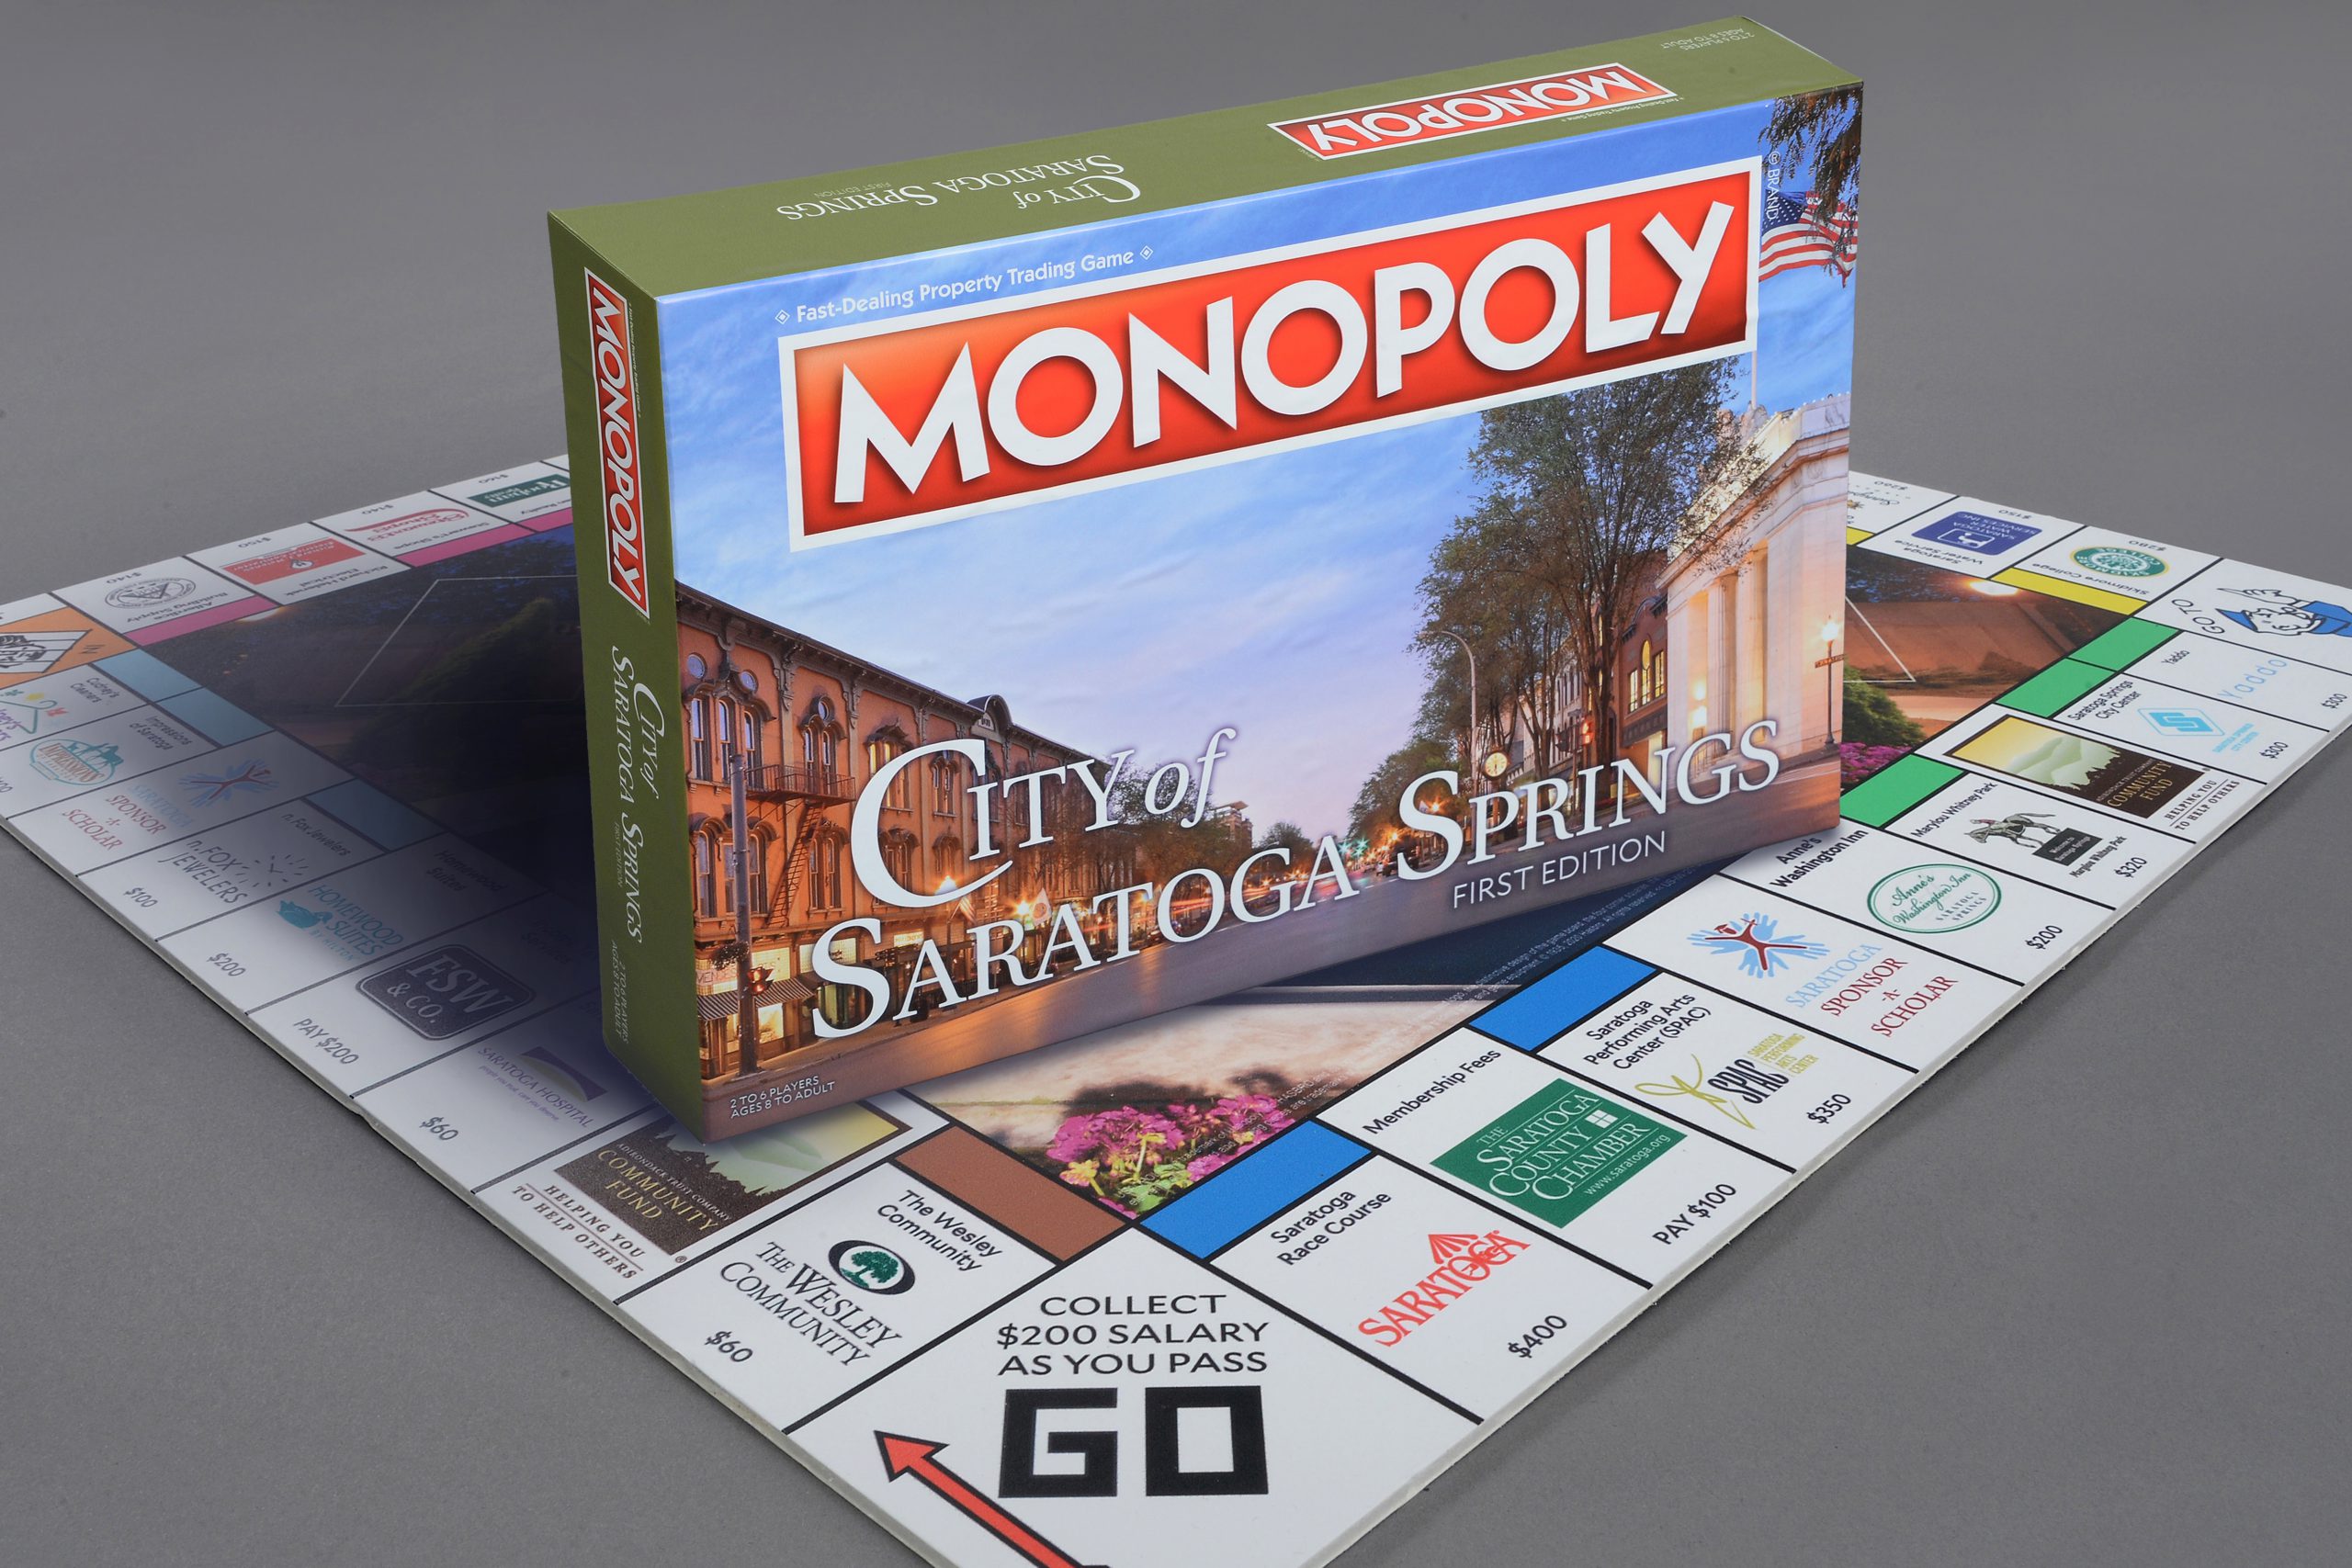 atc-monopoly-game-scaled.jpg